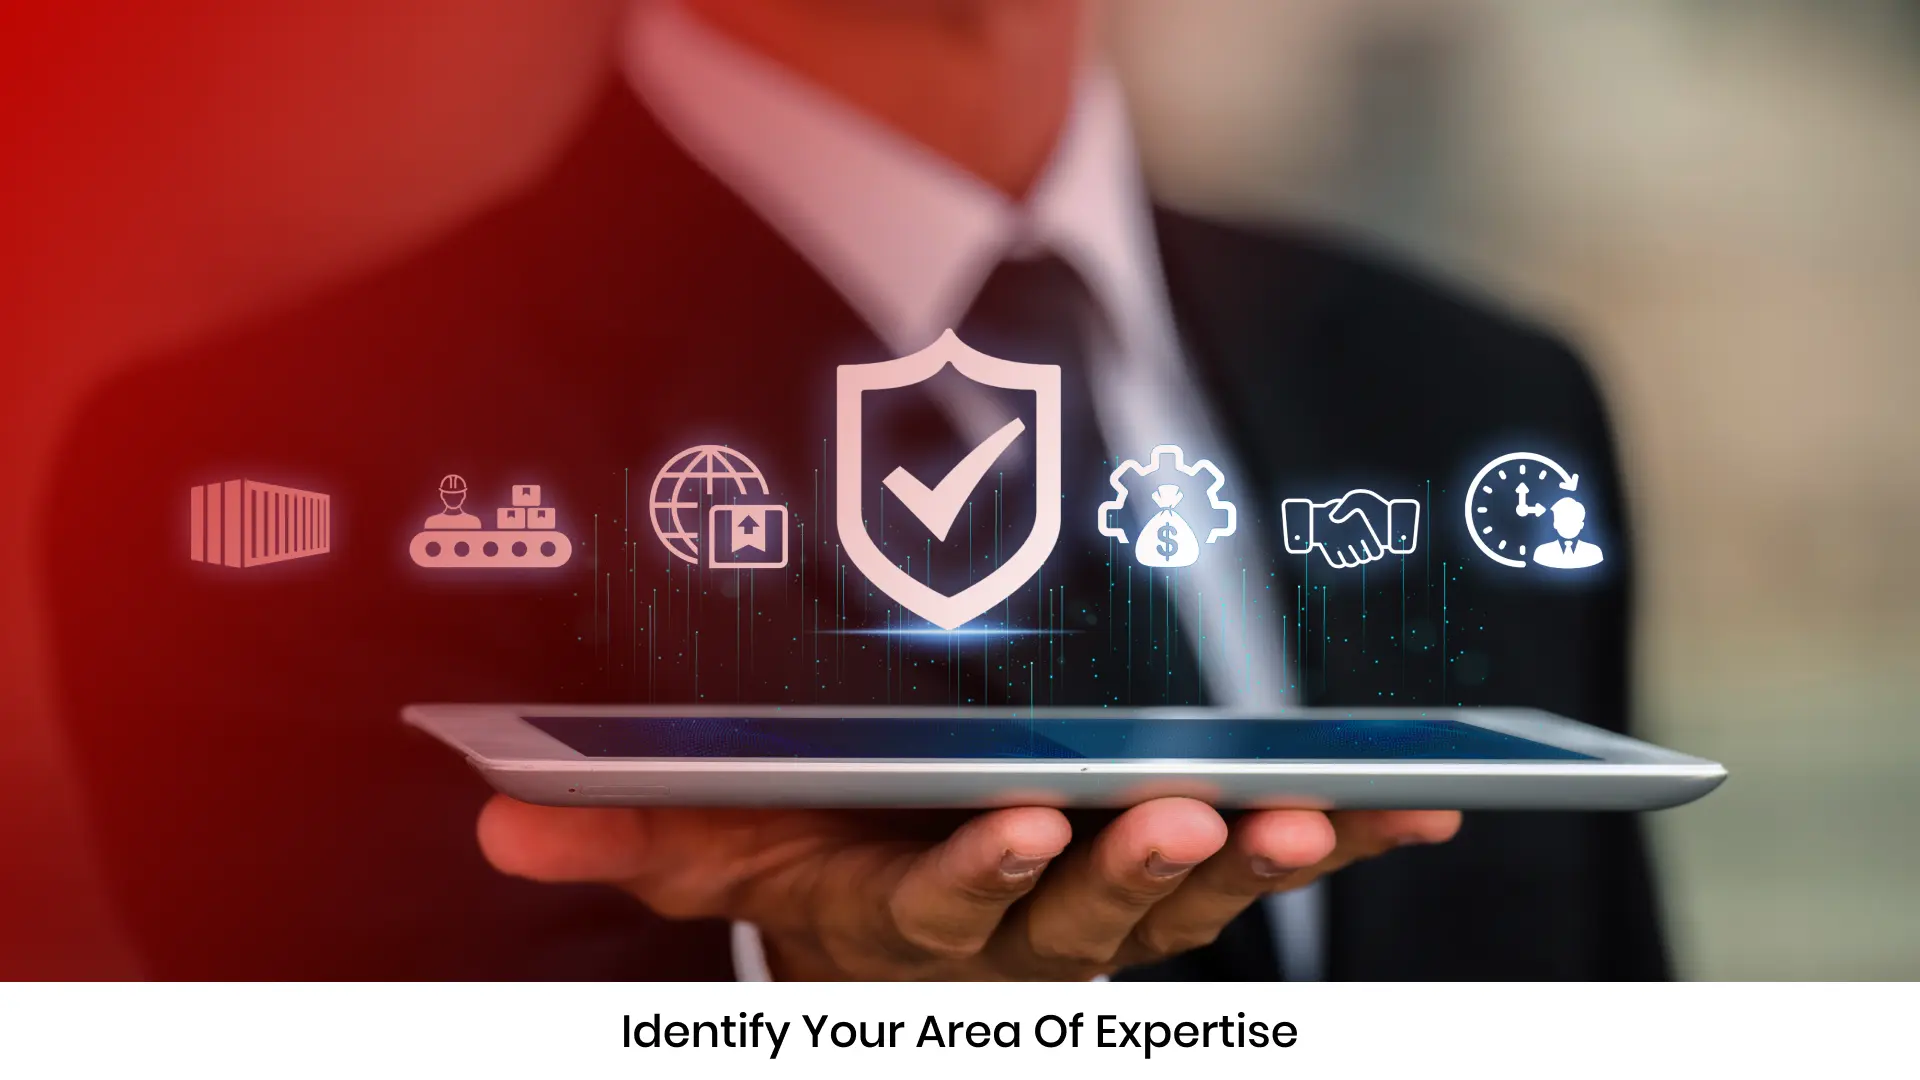 Identify Your Area of Expertise